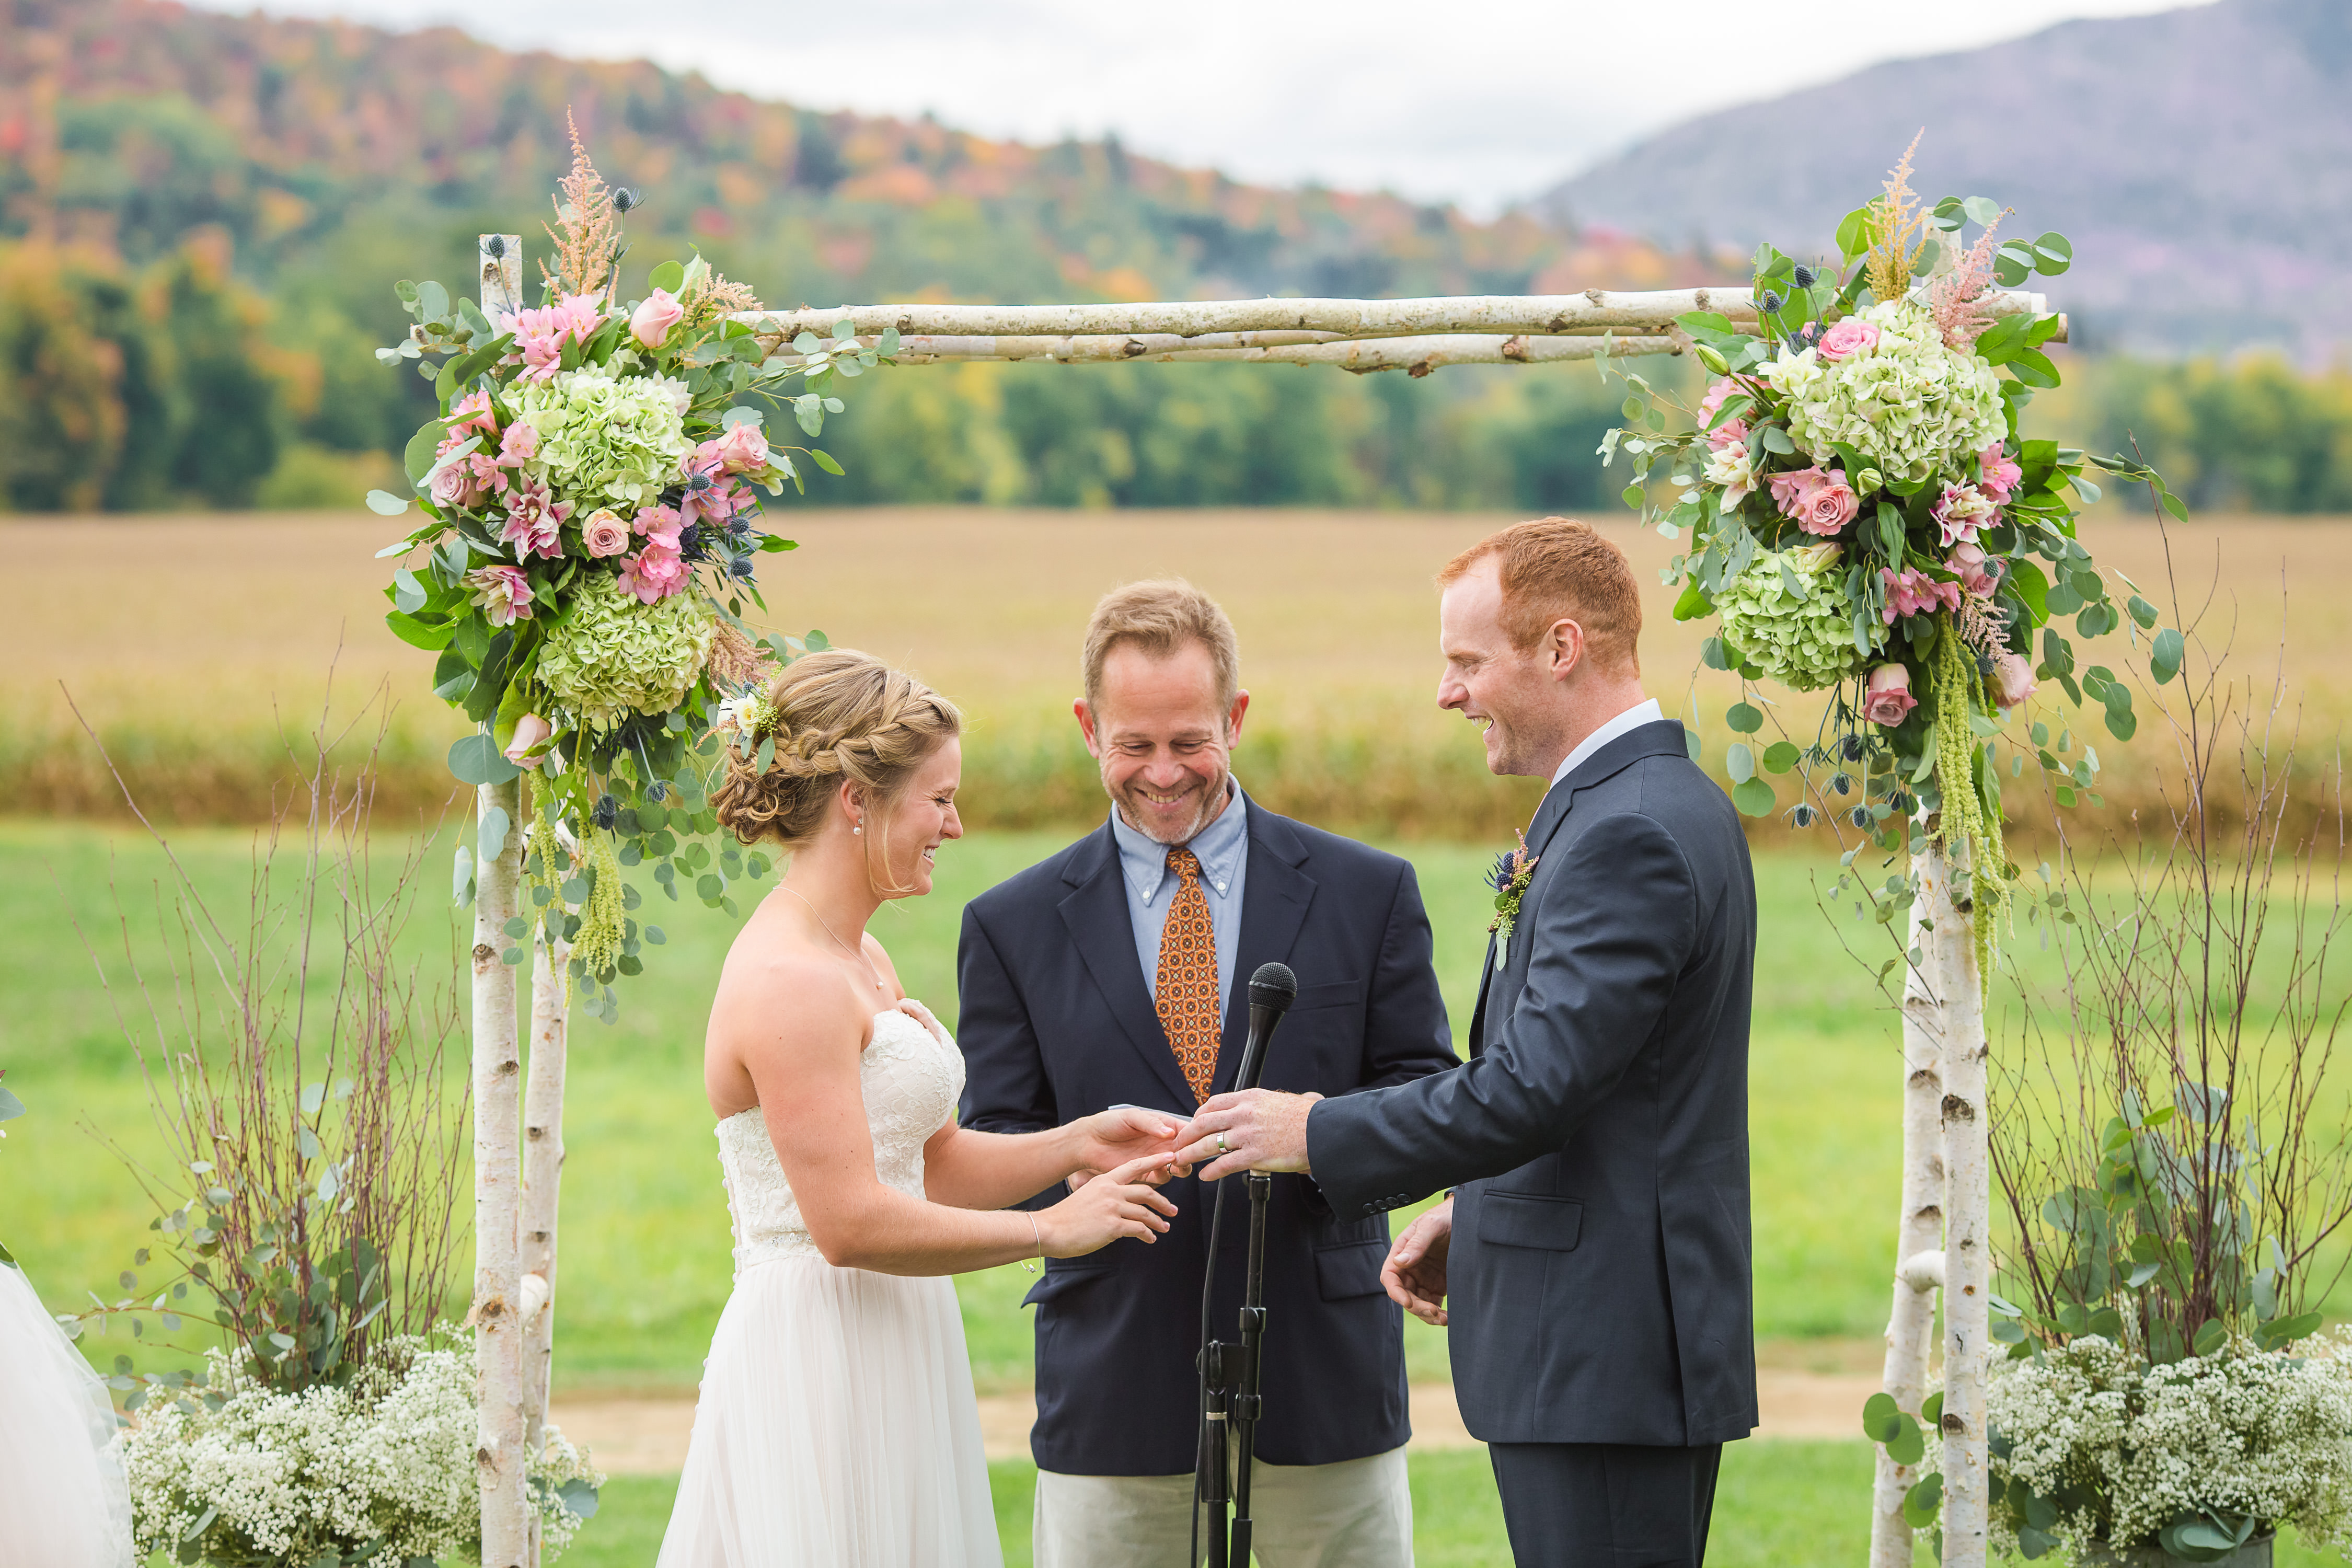 Bride, groom, and a wedding officiant standing under an outdoor wedding arch at a fall wedding in Vermont.